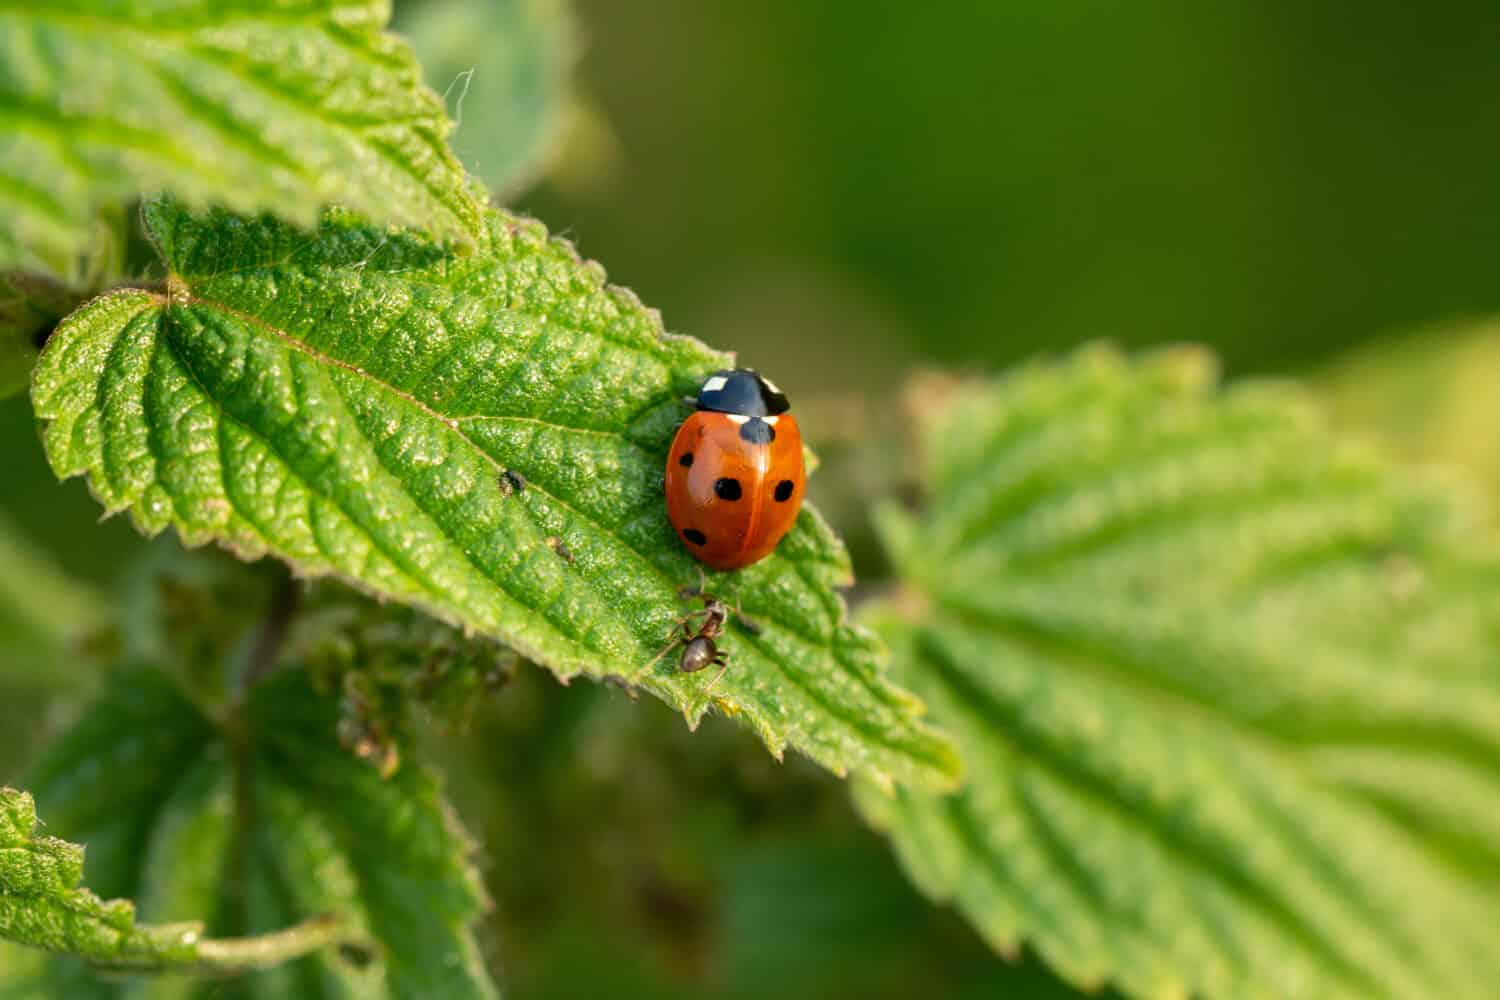 Ladybugs Facts, Types, Lifespan, Classification, Habitat, Pictures